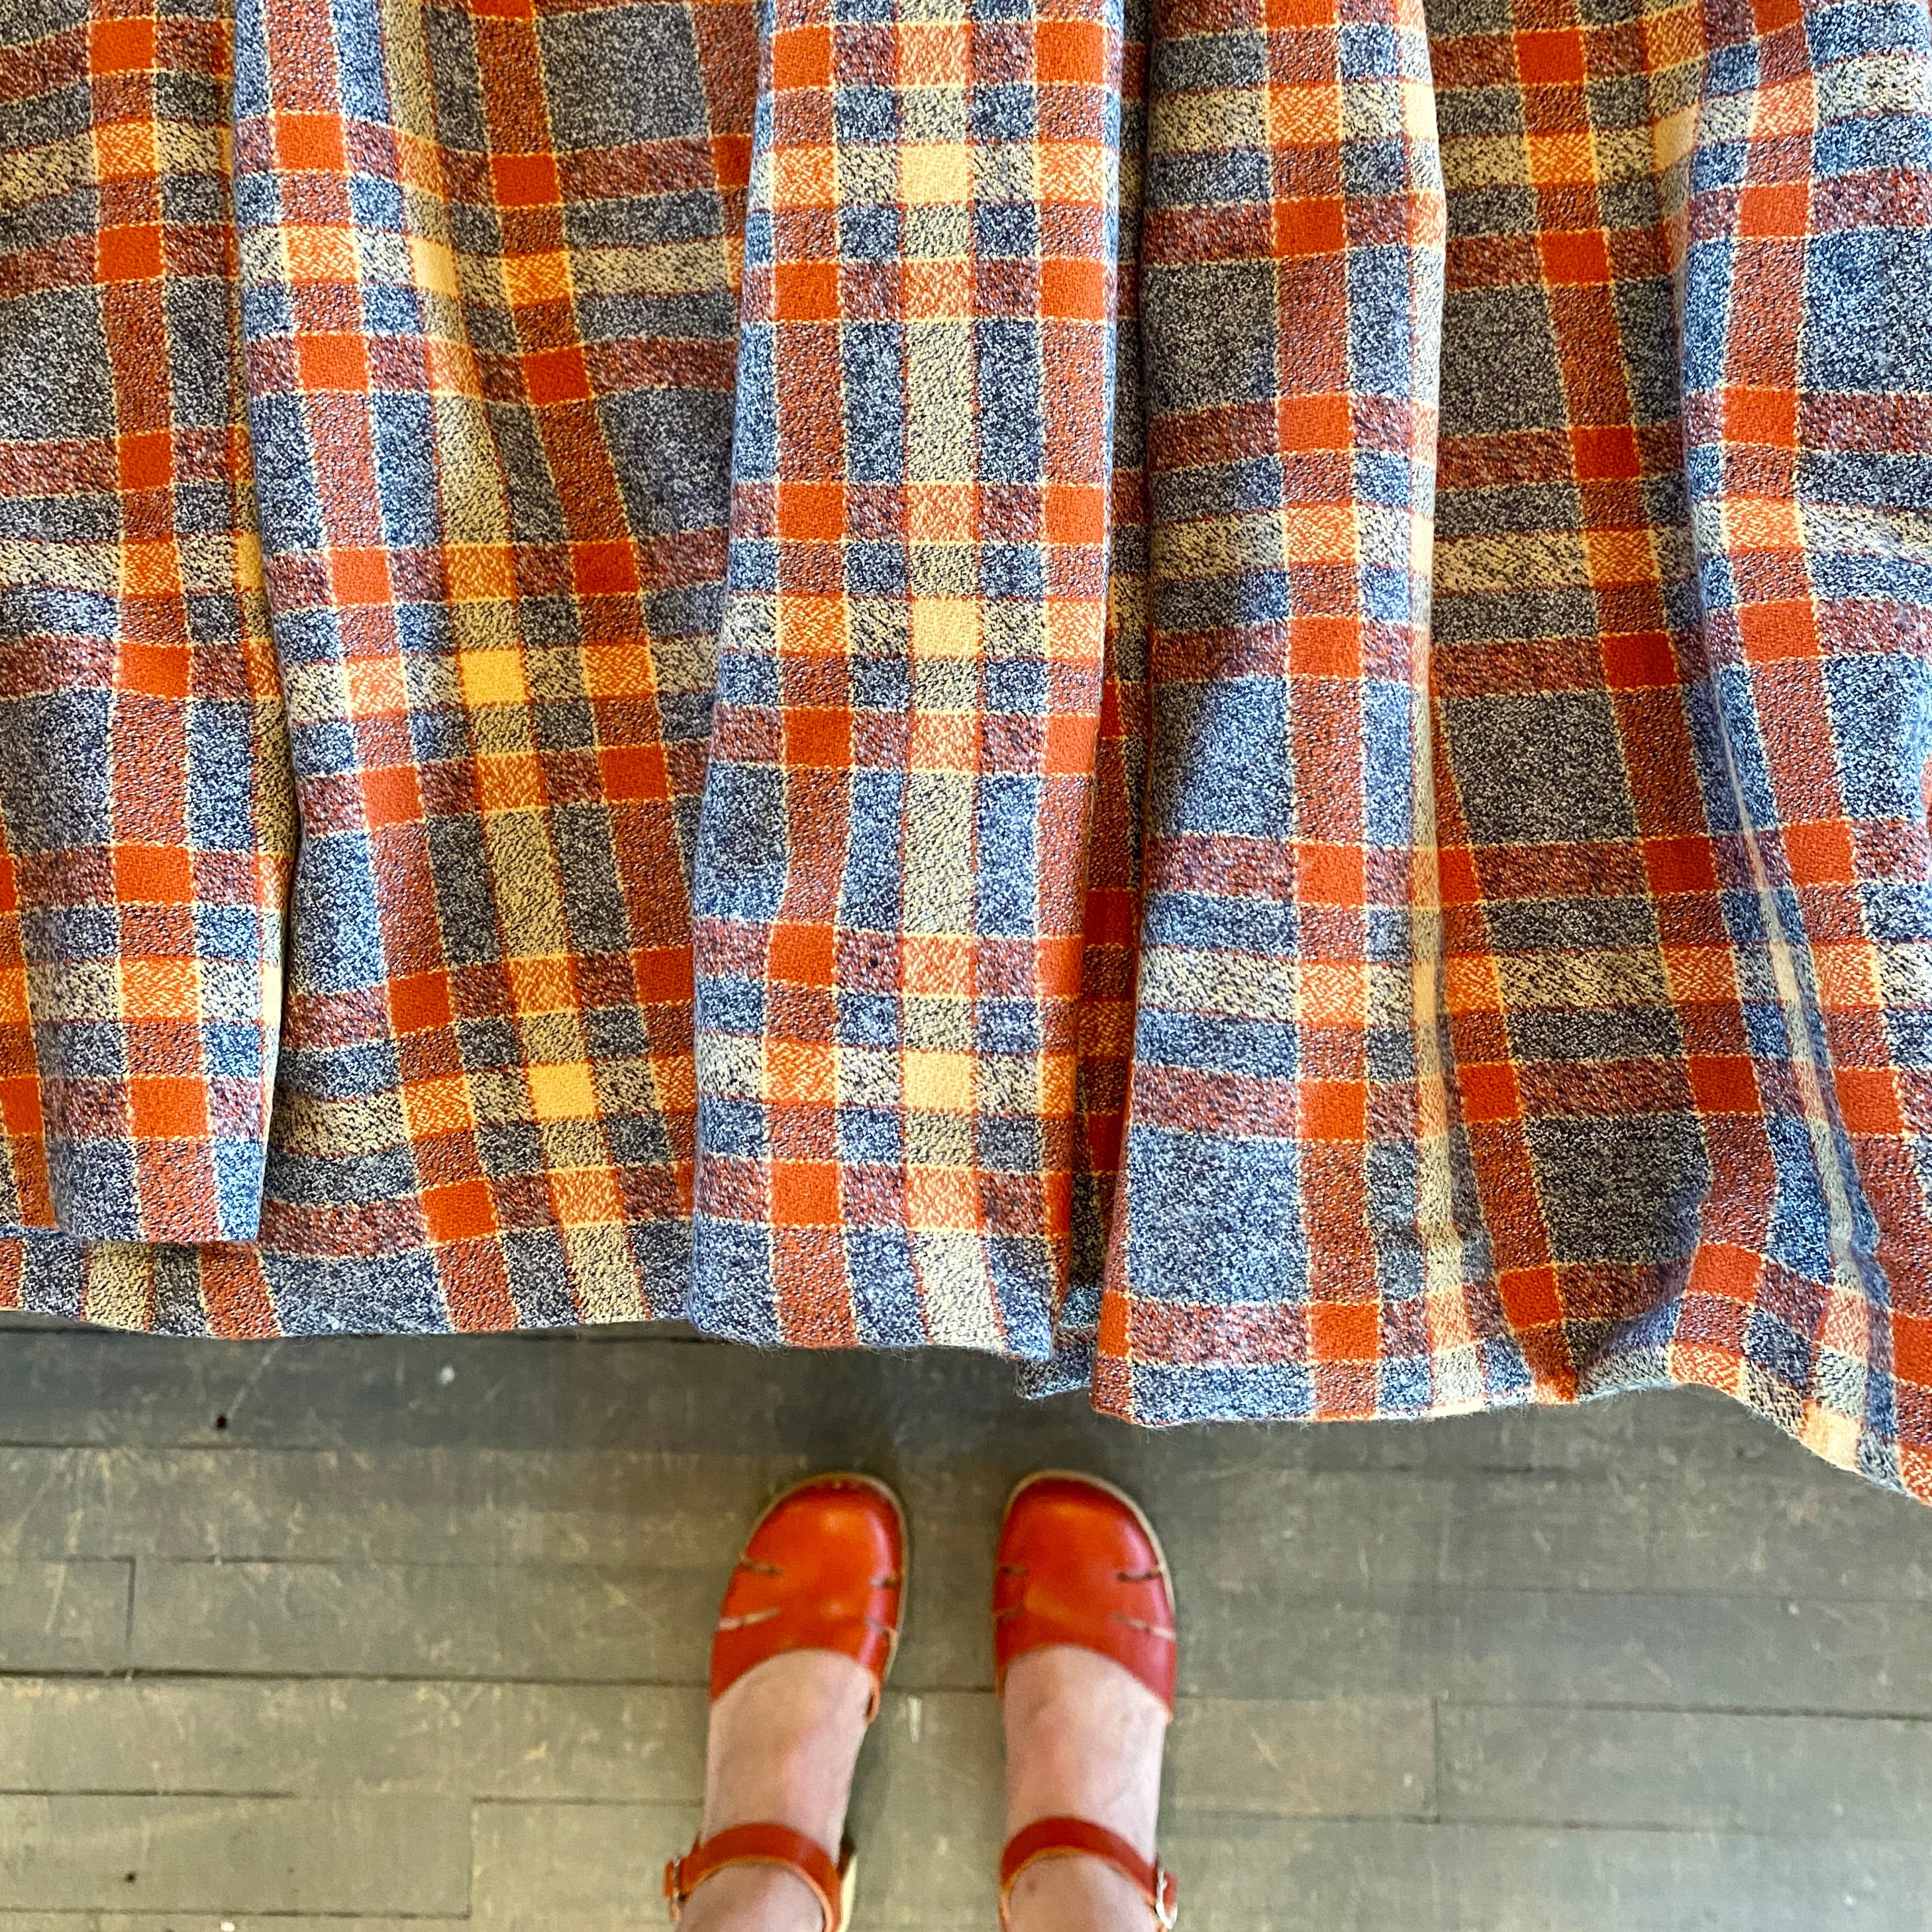 Flannel Fabric - Orange Rust Plaid - By the Yard - 100% Cotton Flannel